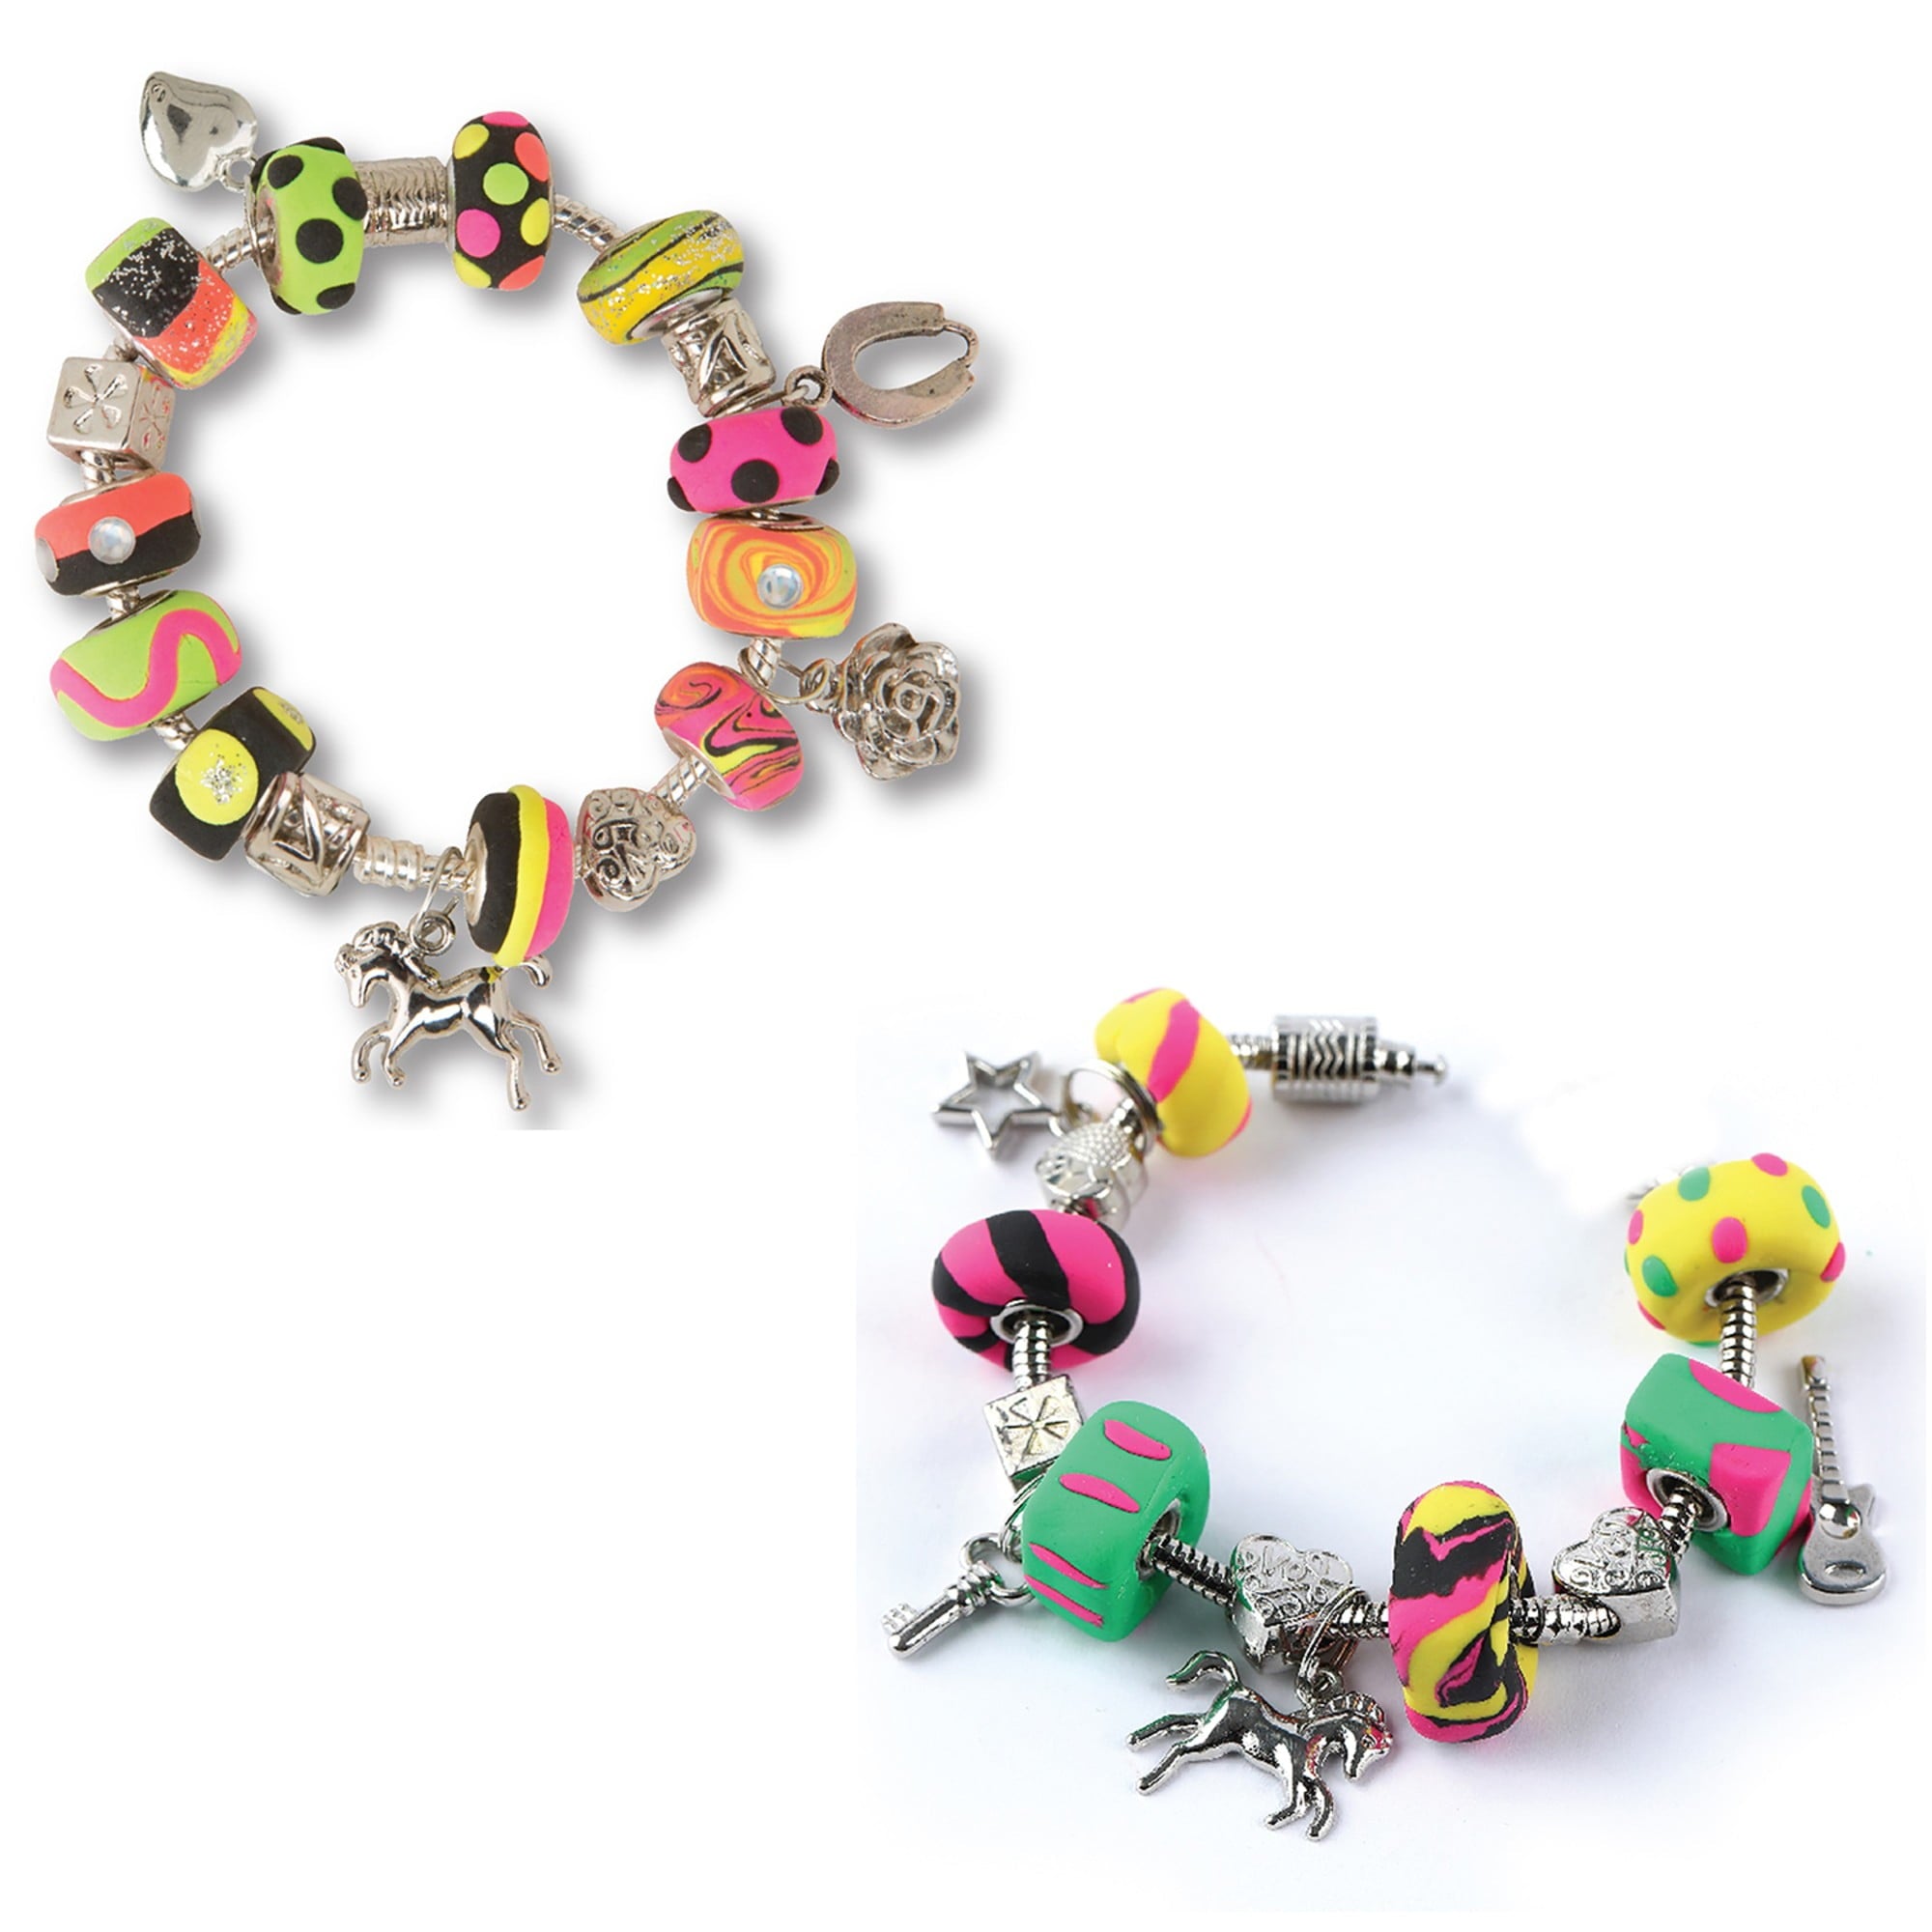 Amav Fashion Time Cool Charm Bracelets,Make Beads from Air-Dry Dough to Create Your Personalized Charm Bracelet, Children Ages 6 Years and Up